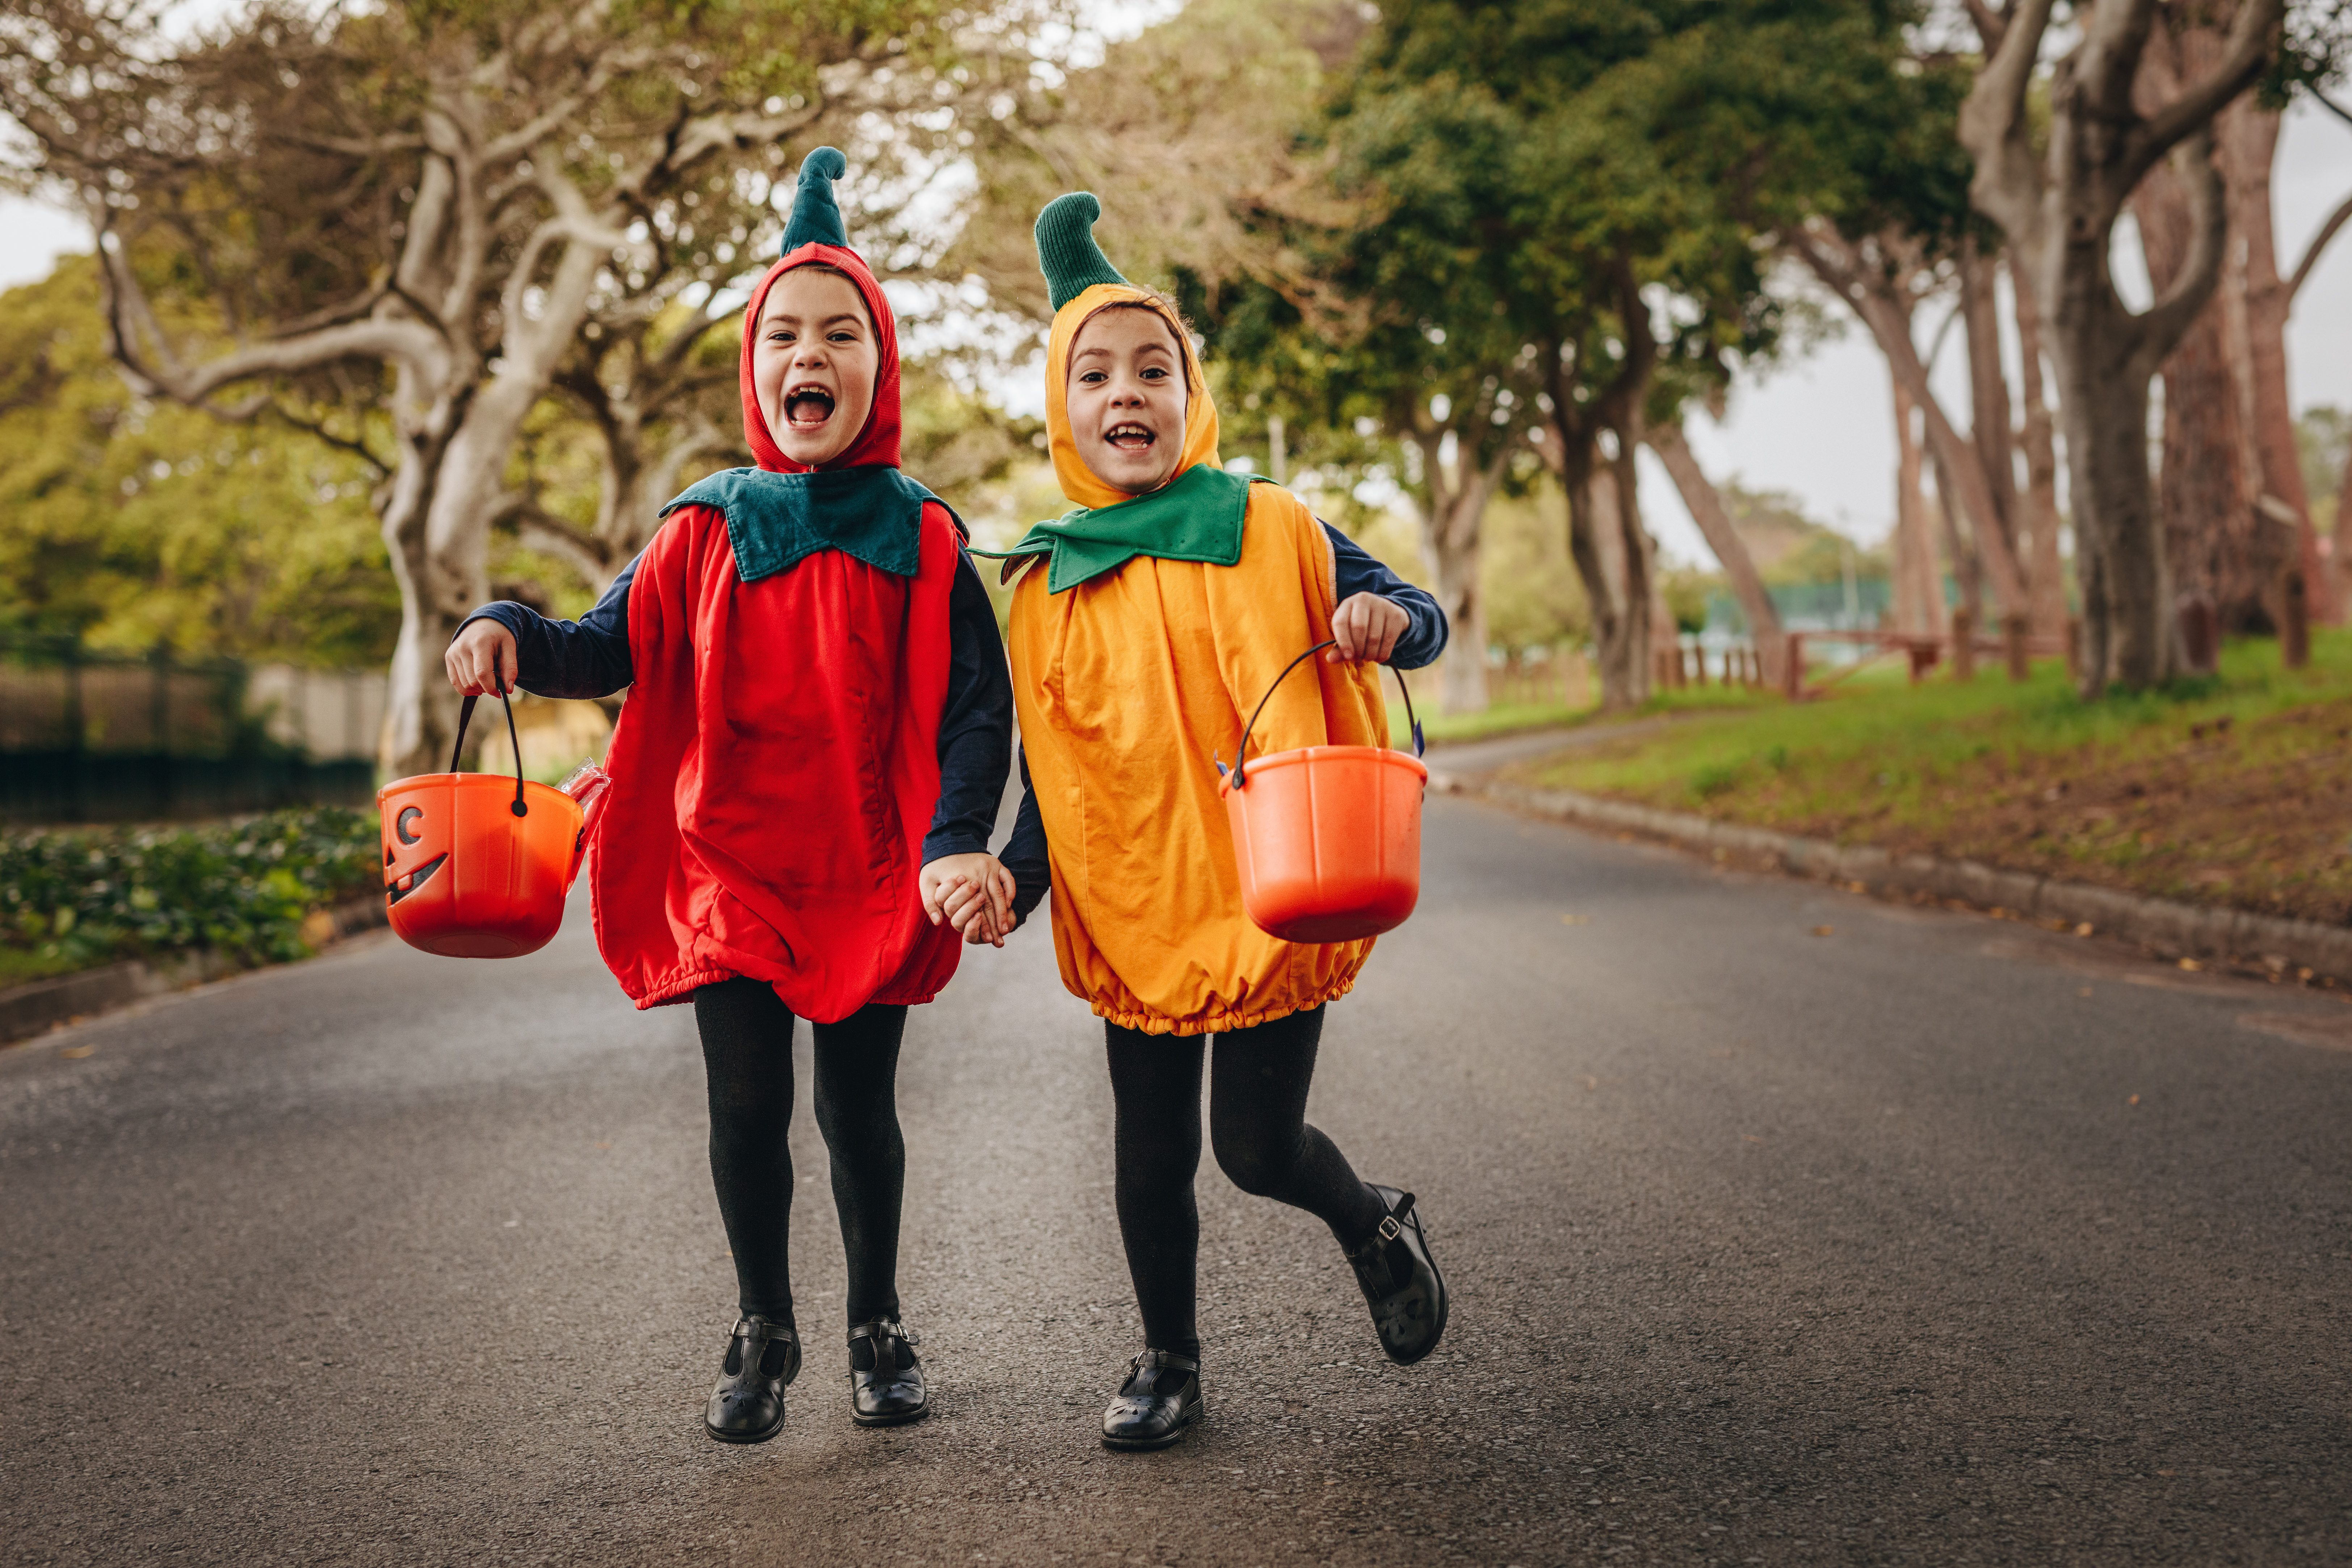 16 Halloween Safety Tips Experts Wish Everyone Would Follow